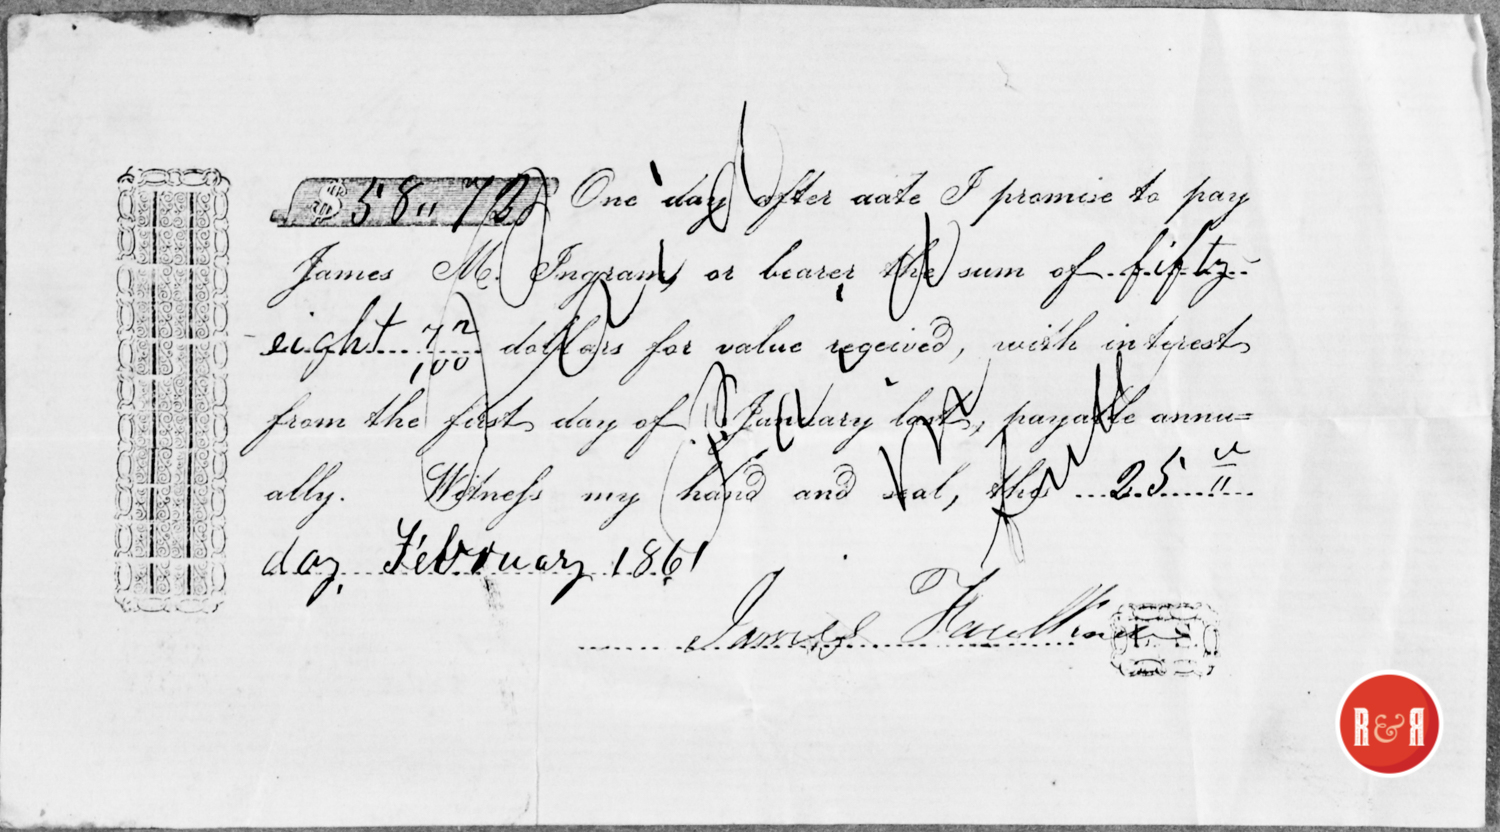 NOTE OF PAYMENT TO JAMES M. INGRAM - 1861